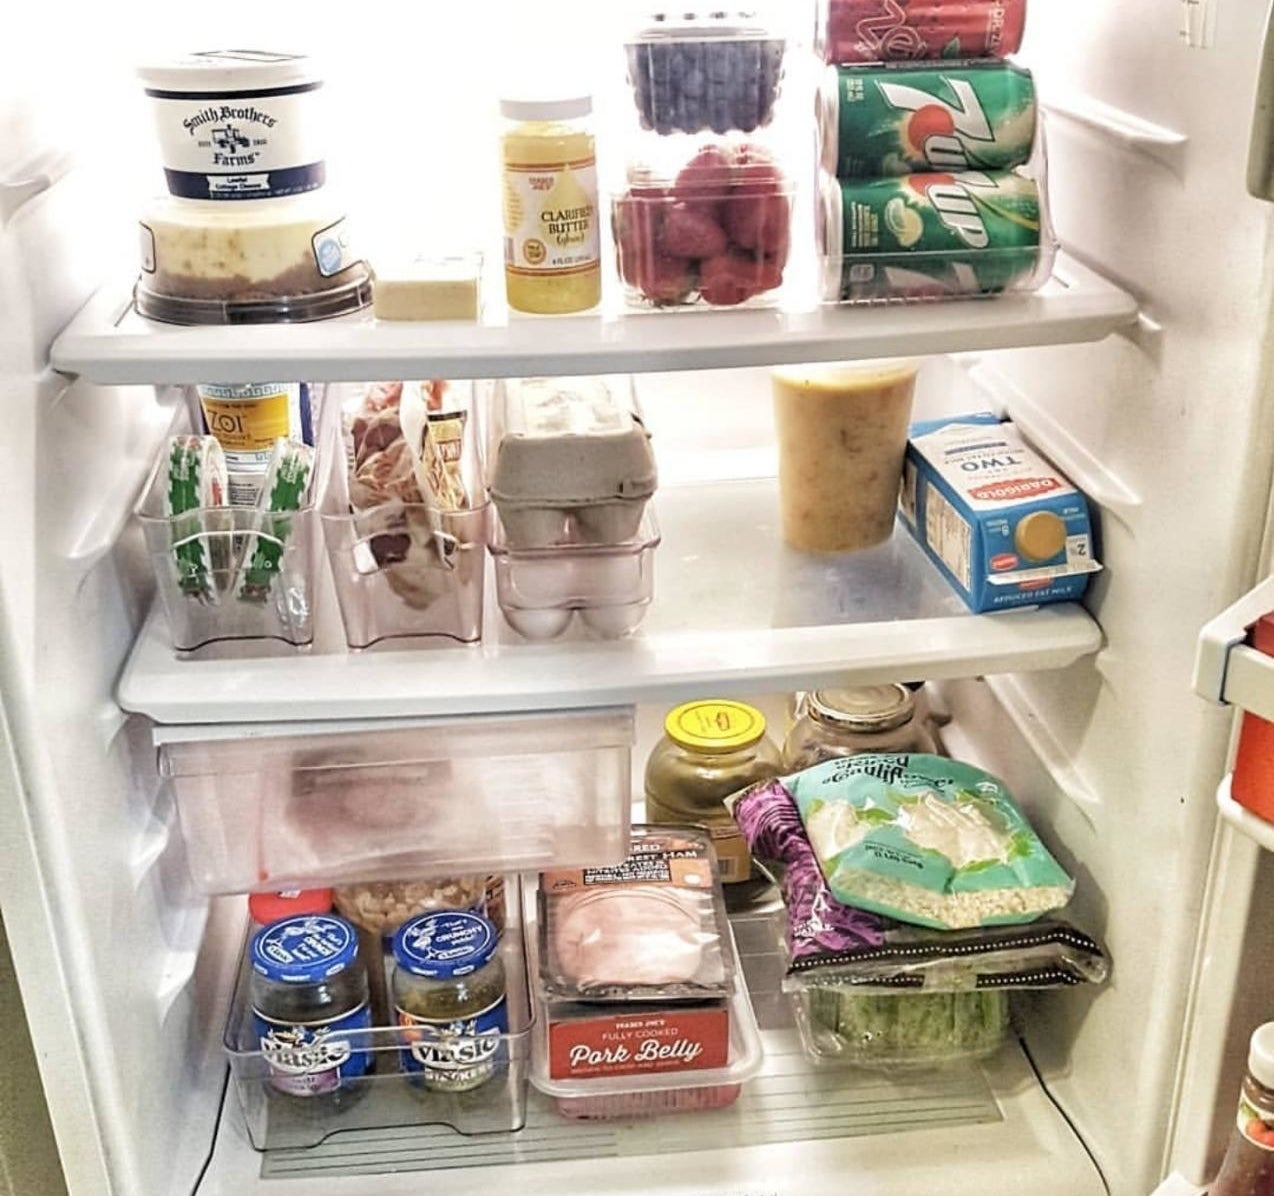 a refrigerator with its contents neatly organized in clear bins